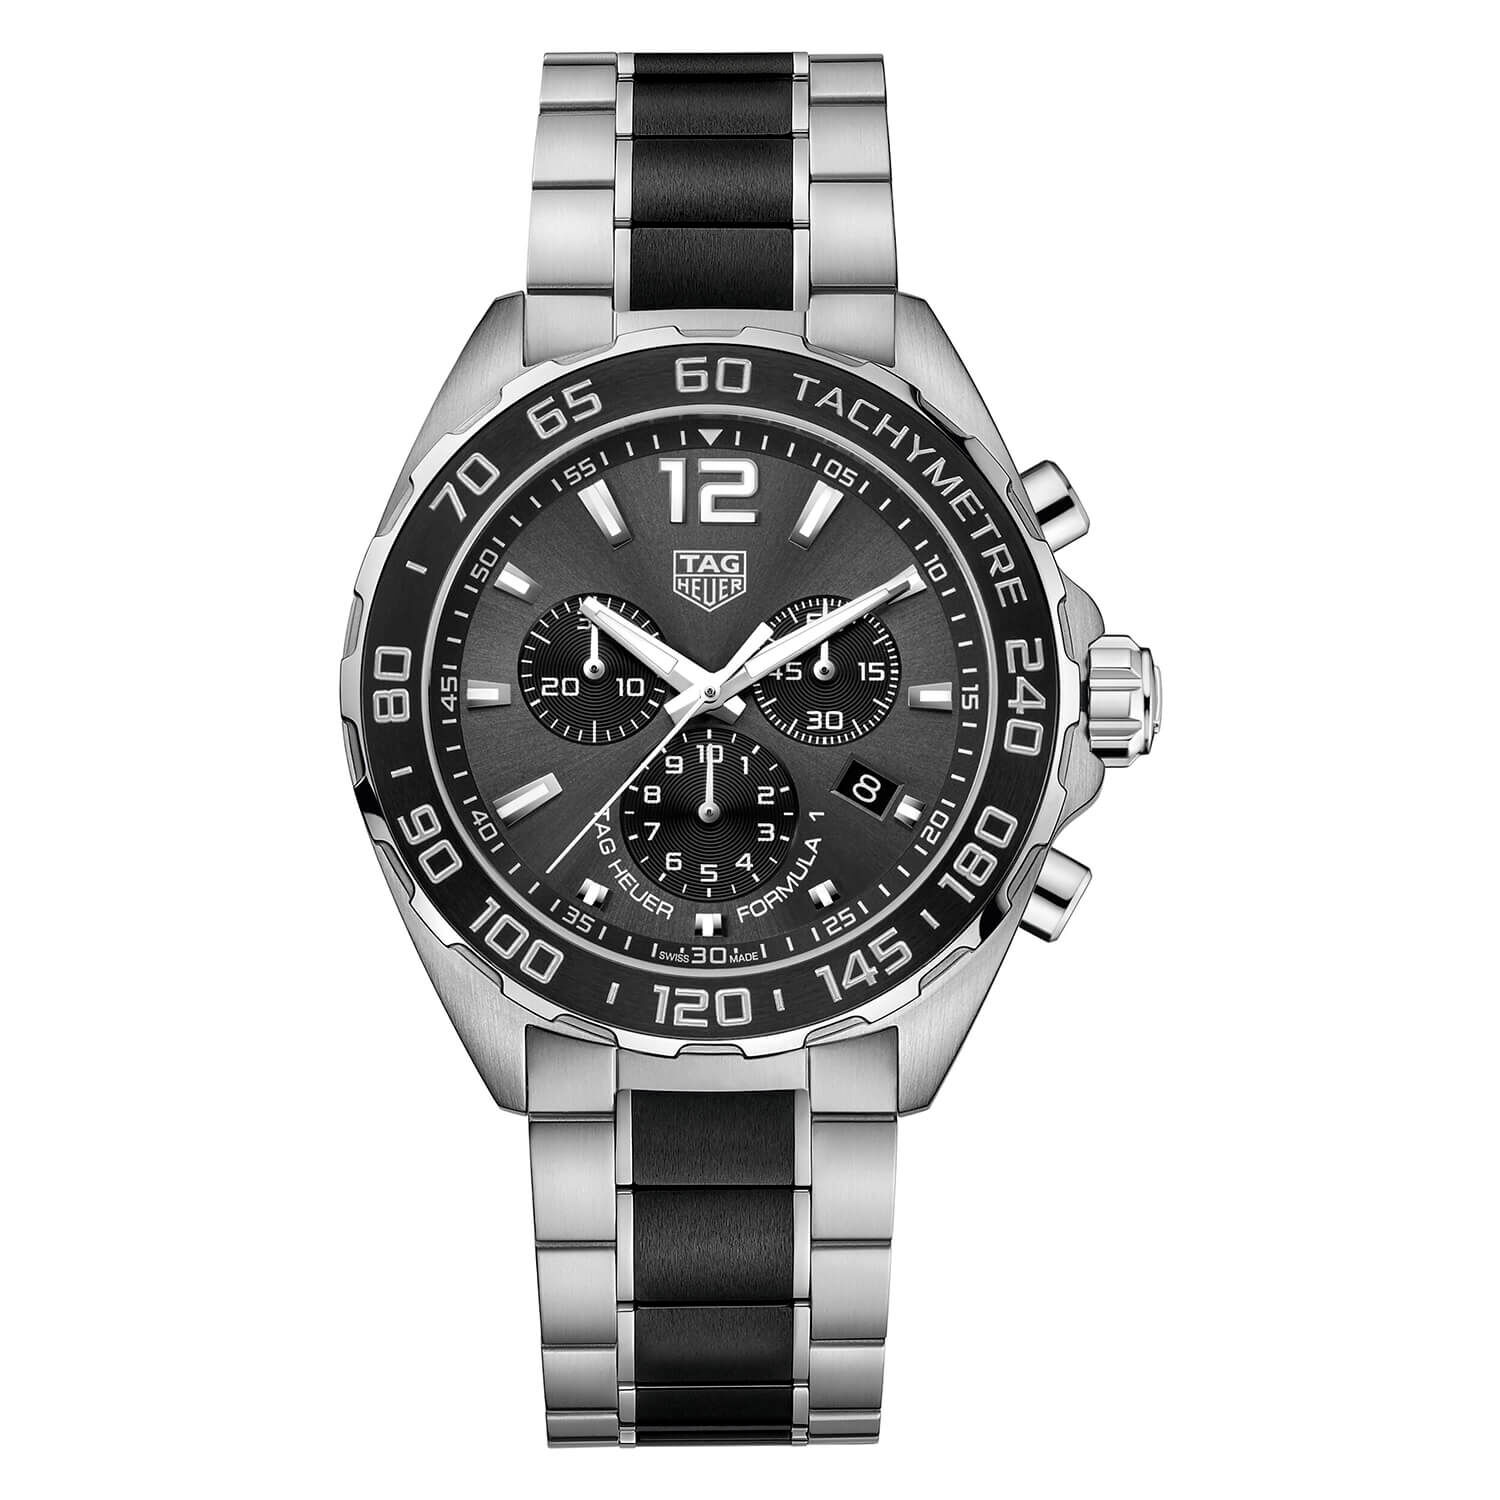 Ceramic Watches at Best Price from Manufacturers, Suppliers & Dealers